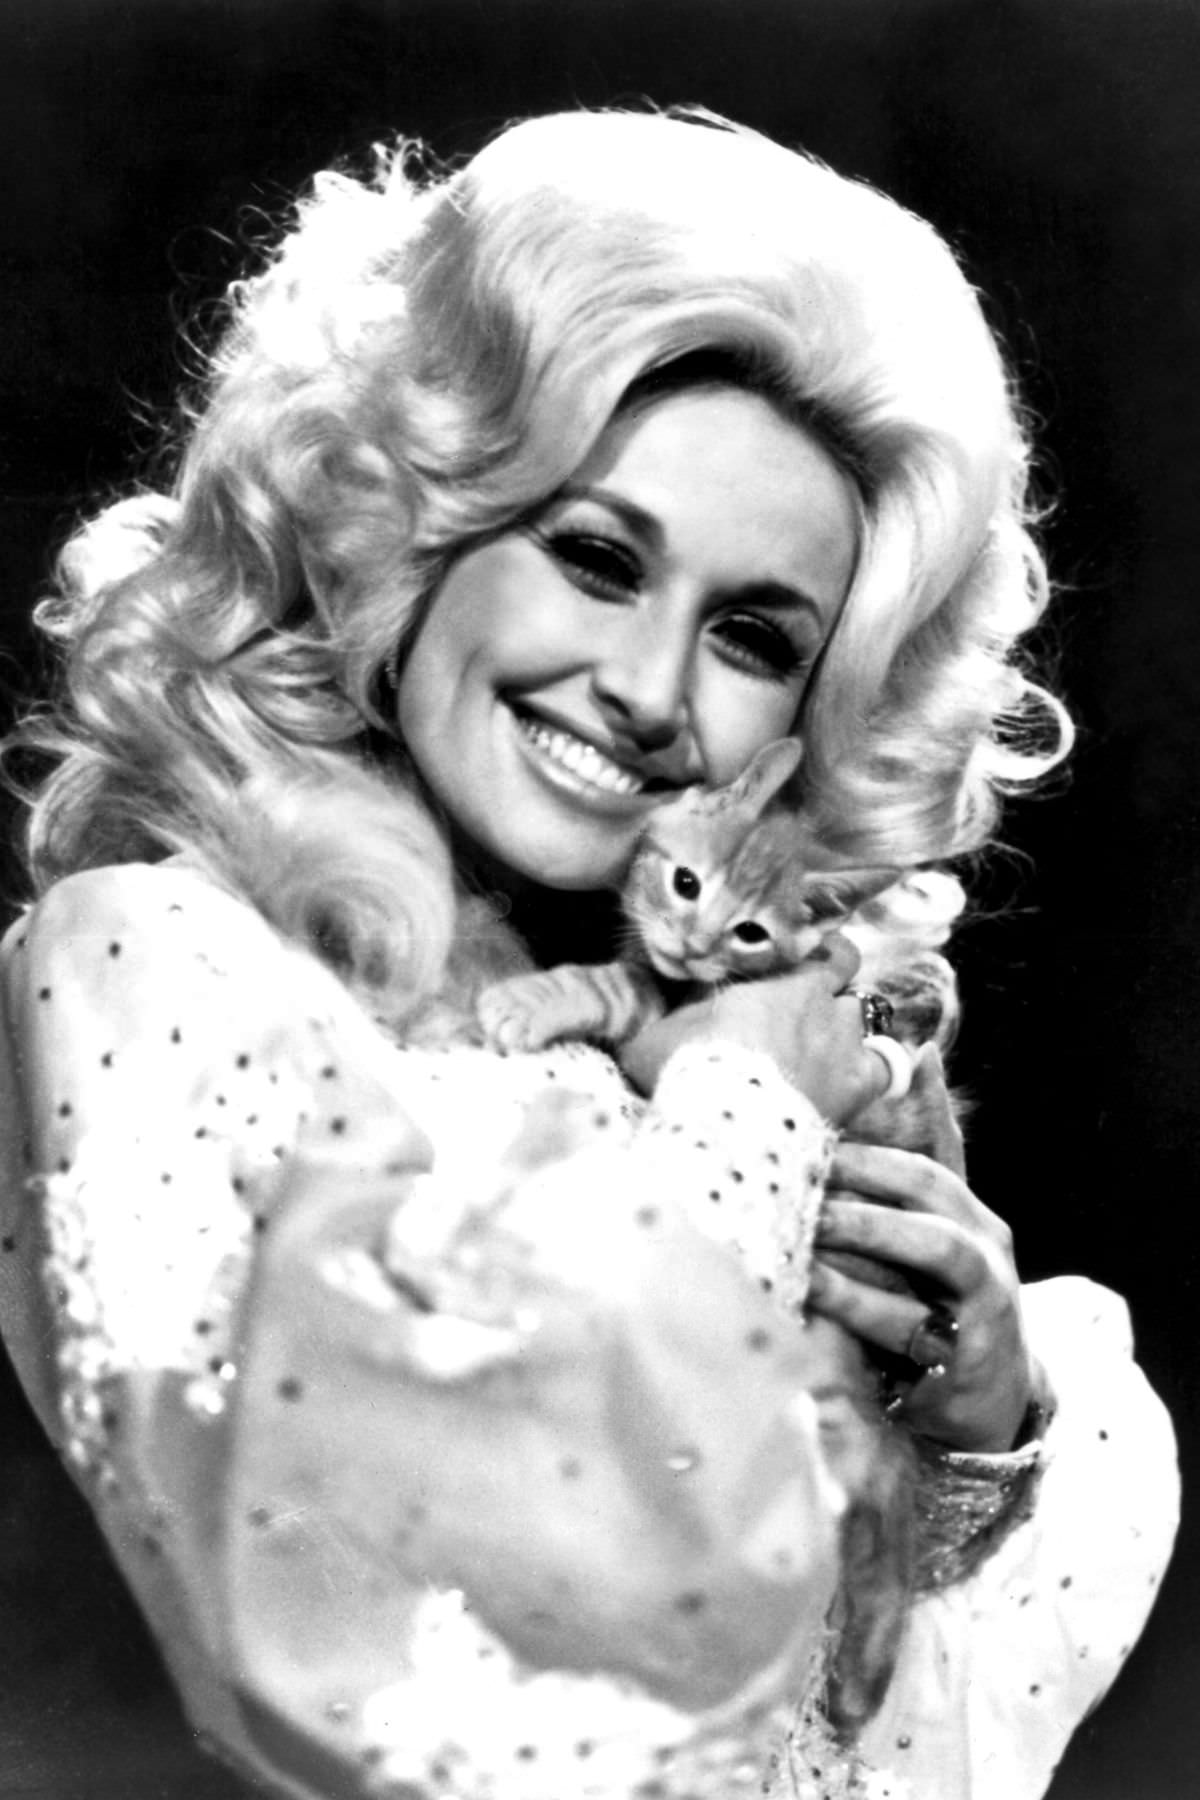 A shoot from the seventies titled “Dolly Parton and Friend.”